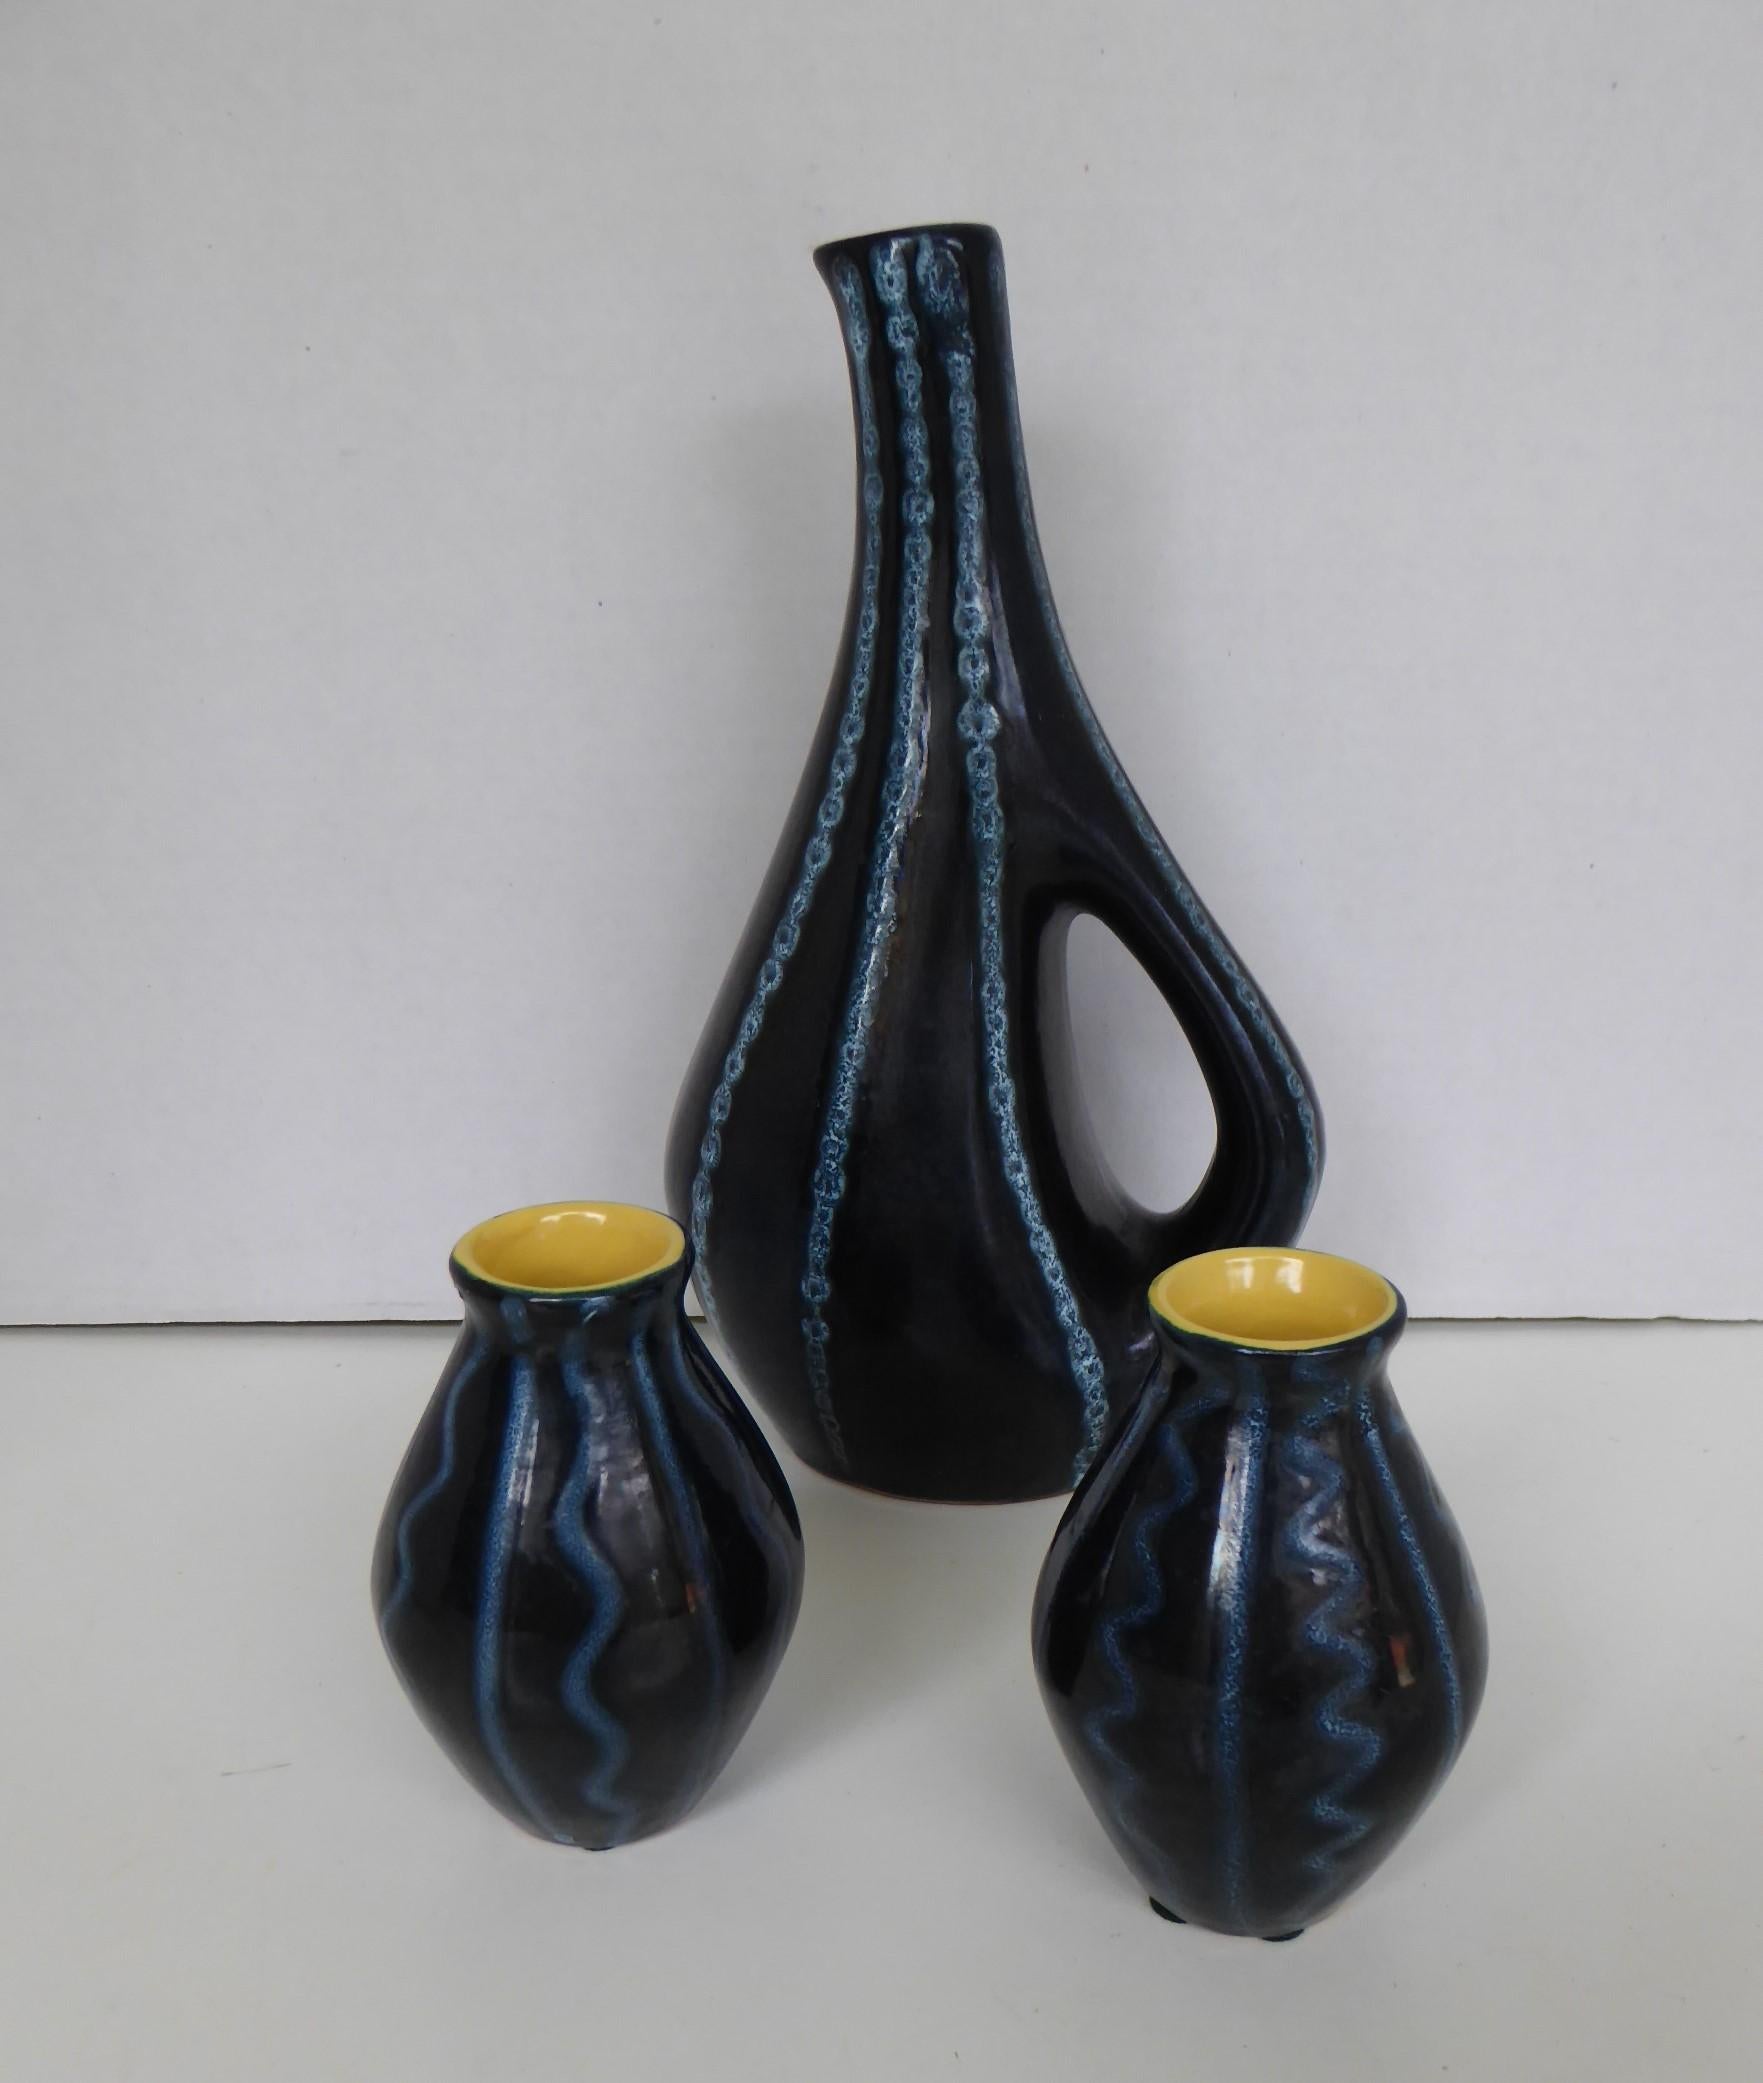 A set of three midcentury ceramic vases by Tofej, a Hungarian pottery maker. These date from the 1950s and the set is comprised of a tall vase with handle and two small bulbous vases. The decoration on all three is of incised blue lines and